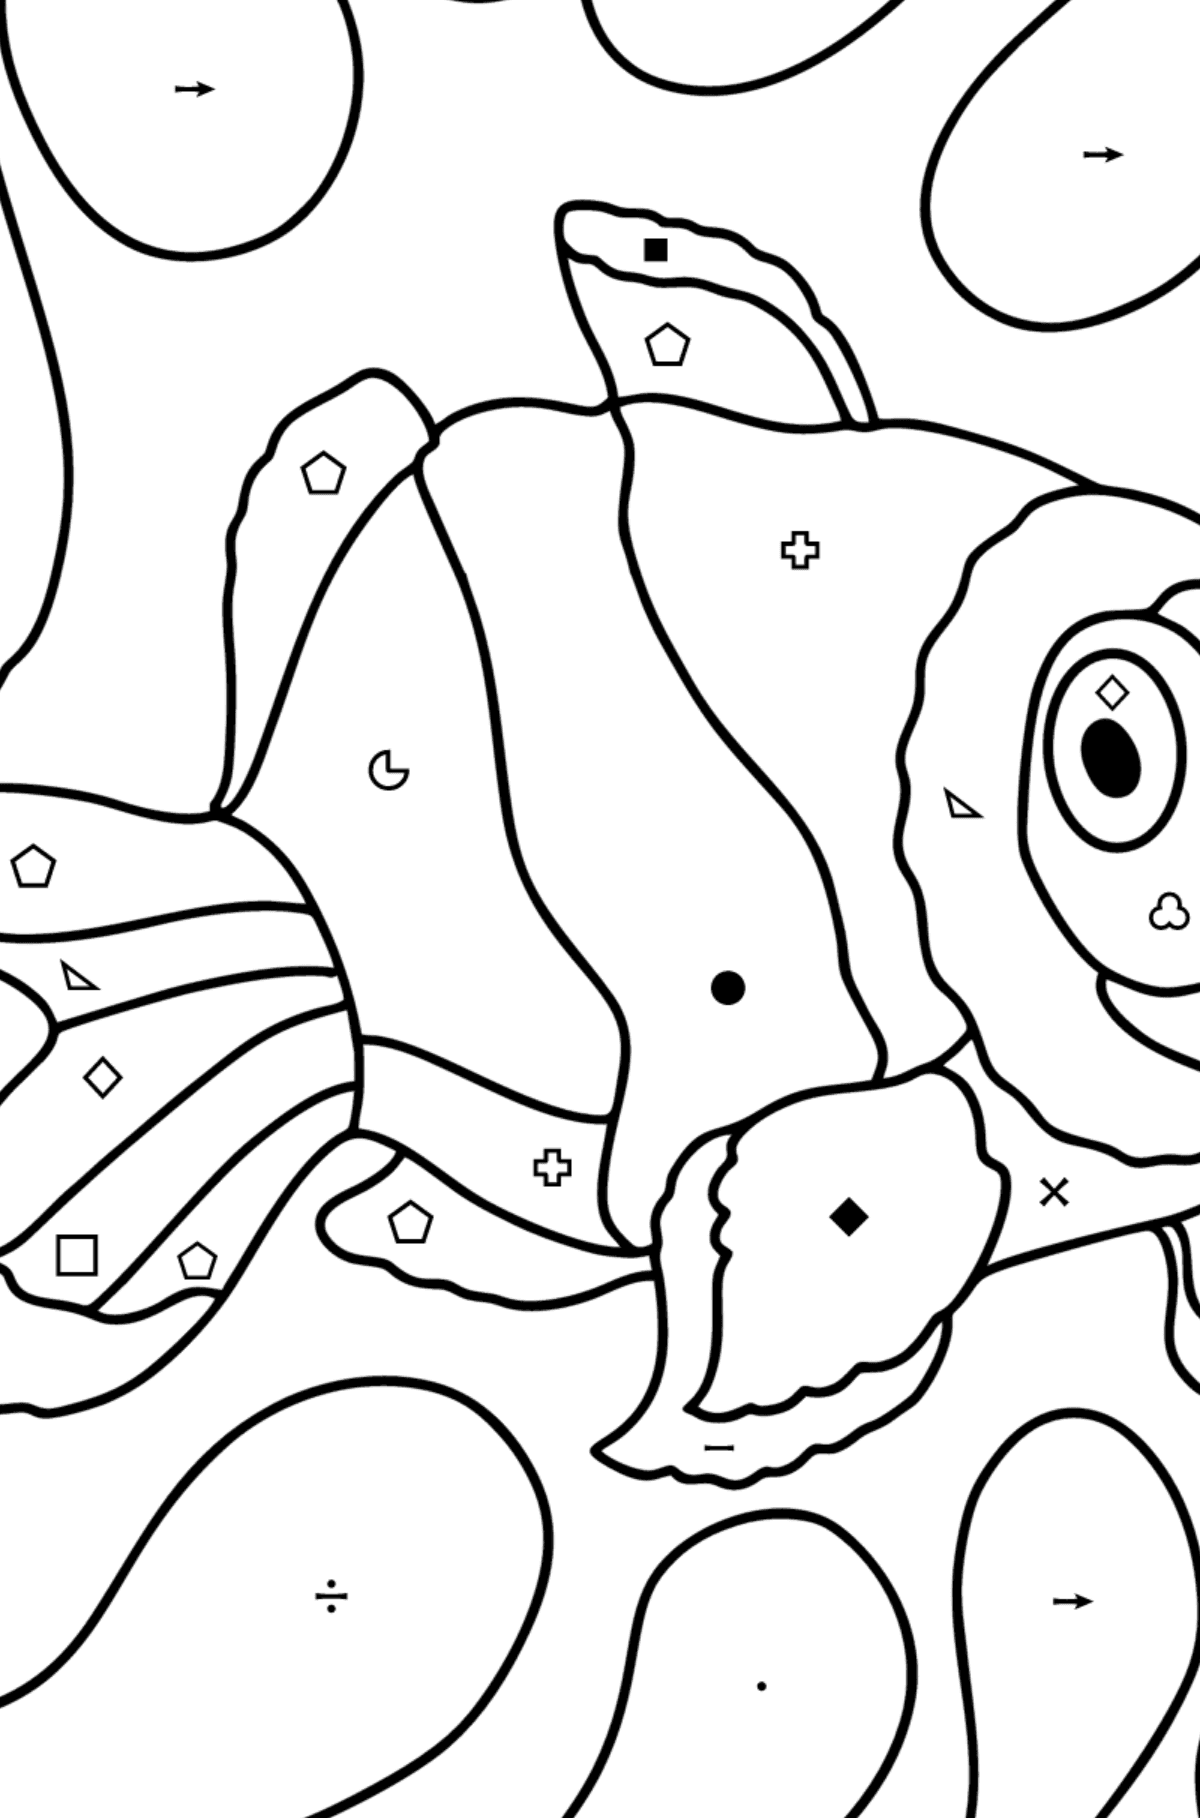 Clown fish coloring page - Coloring by Symbols and Geometric Shapes for Kids